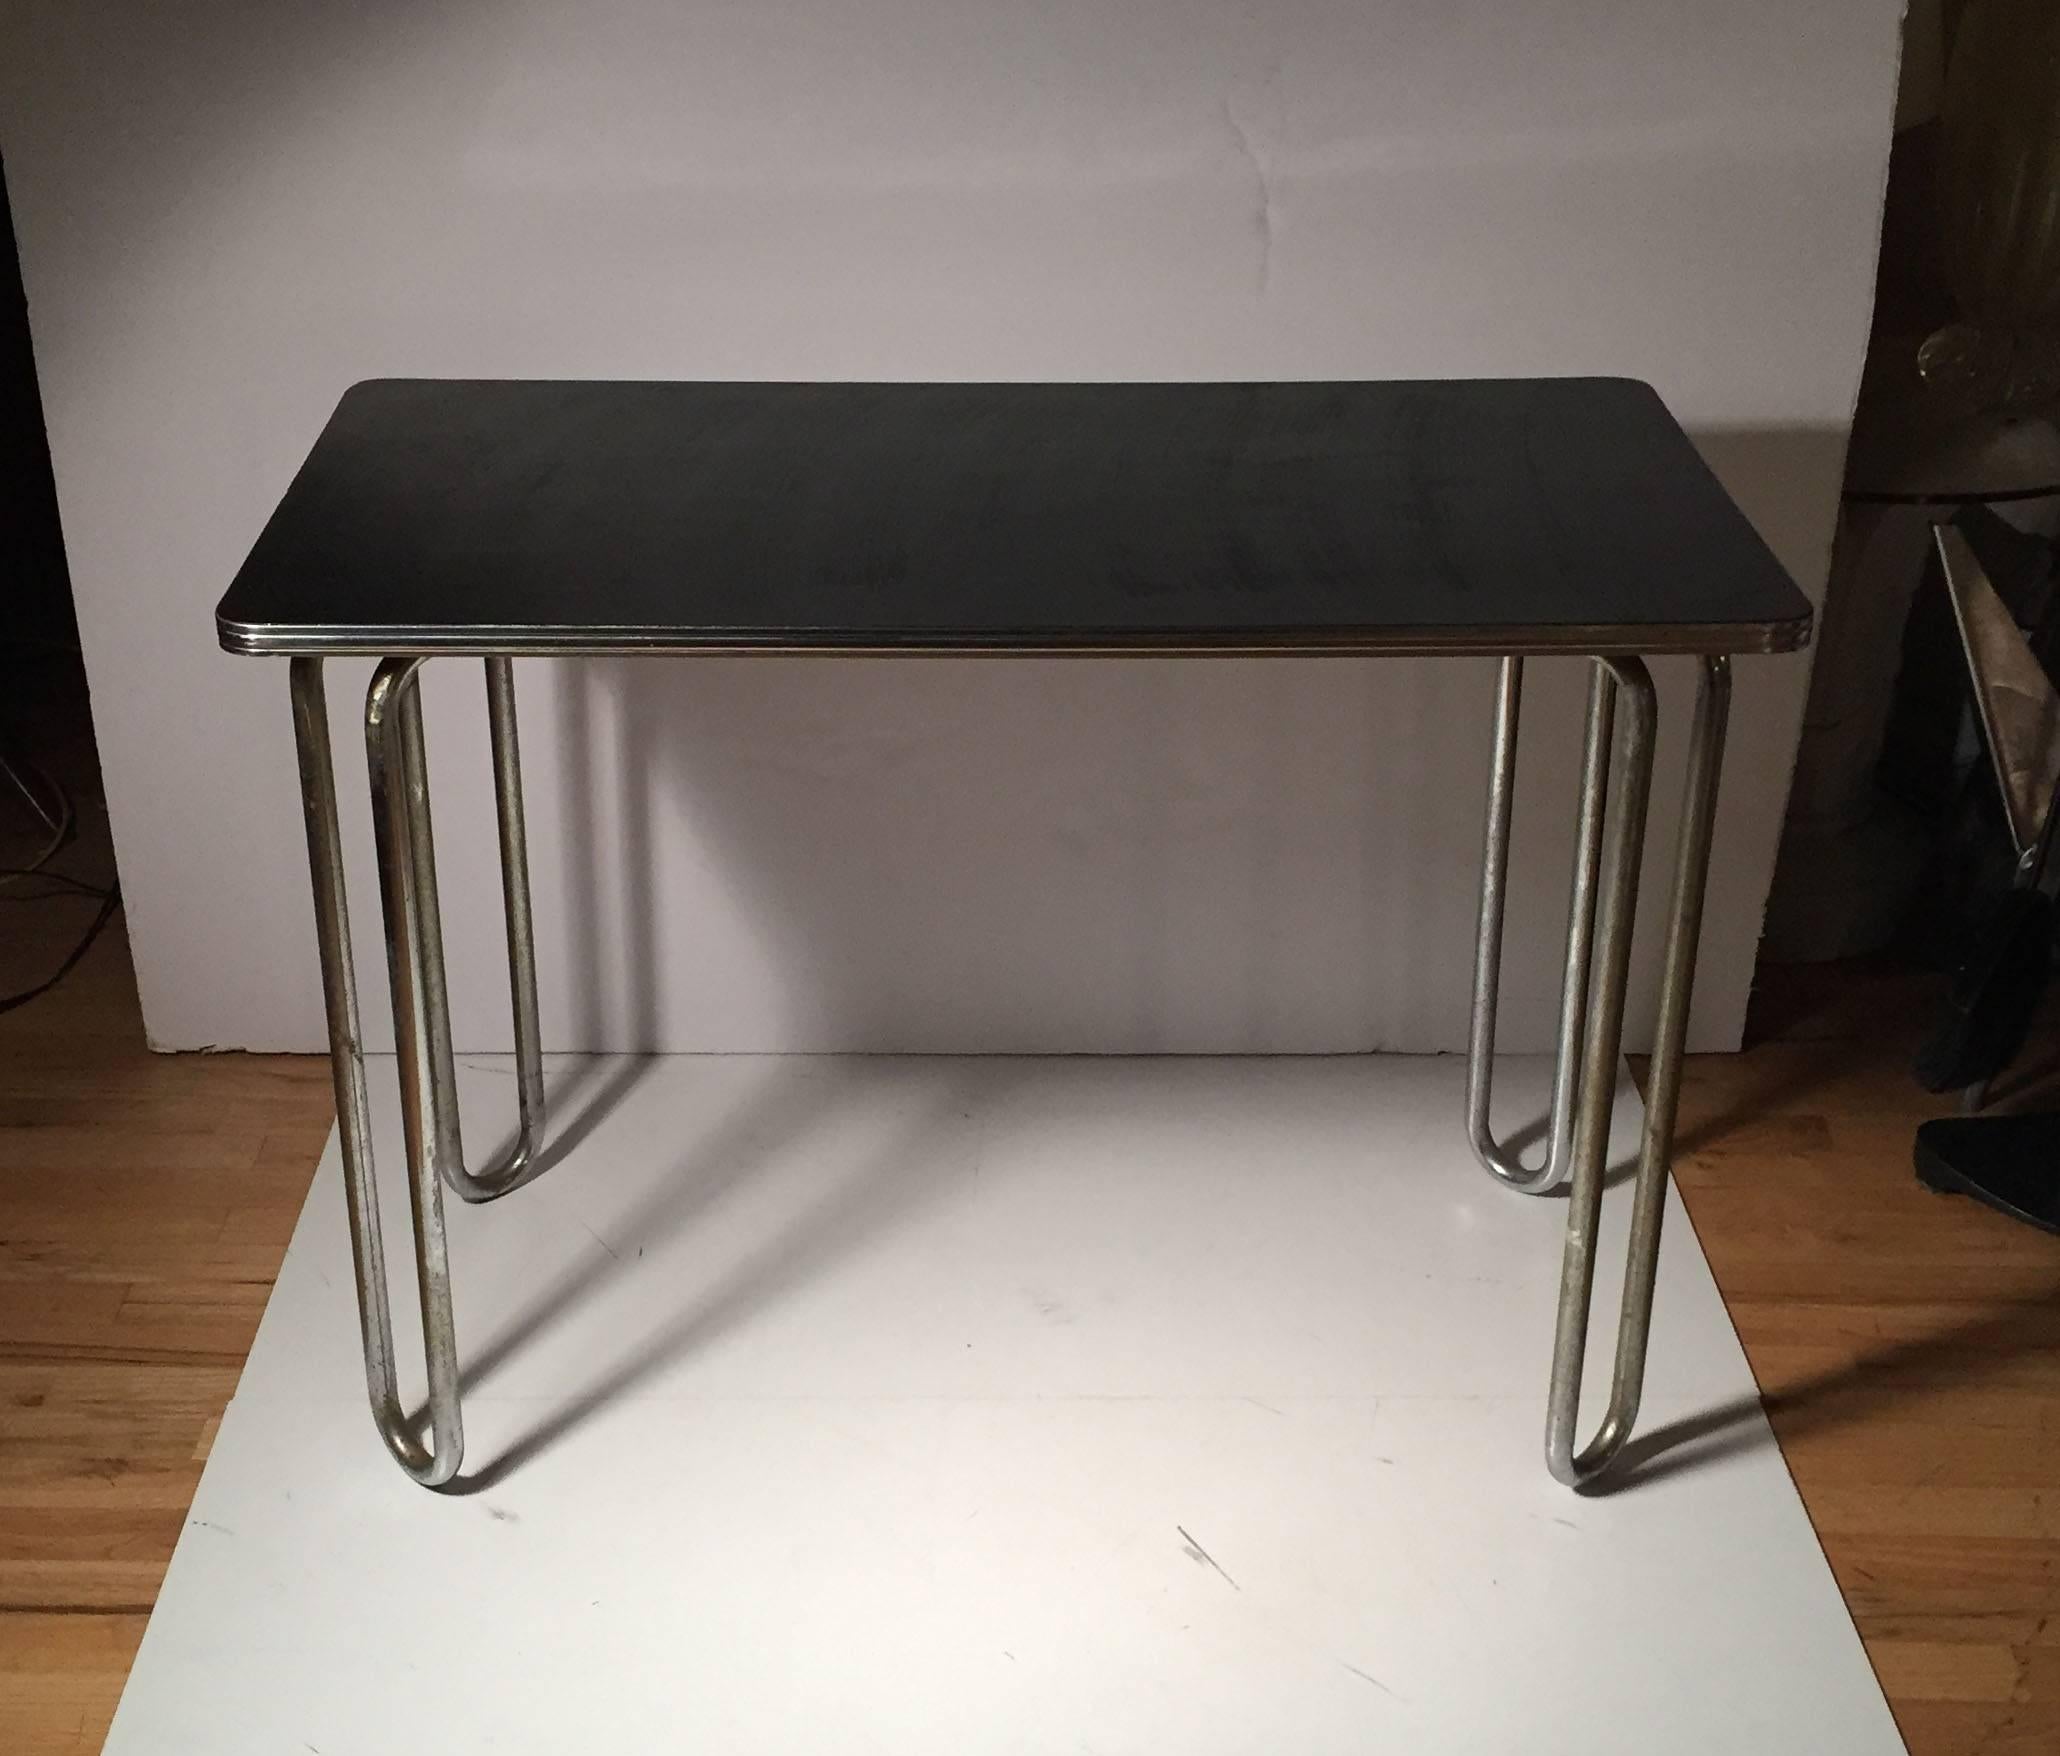 A nice period chrome tubular table by quality company. Makes for a nice writing desk, console or sofa table. Of the manner of The Bauhaus Marcel Breuer, Wolfgang Hoffmann and Gilbert Rohde.